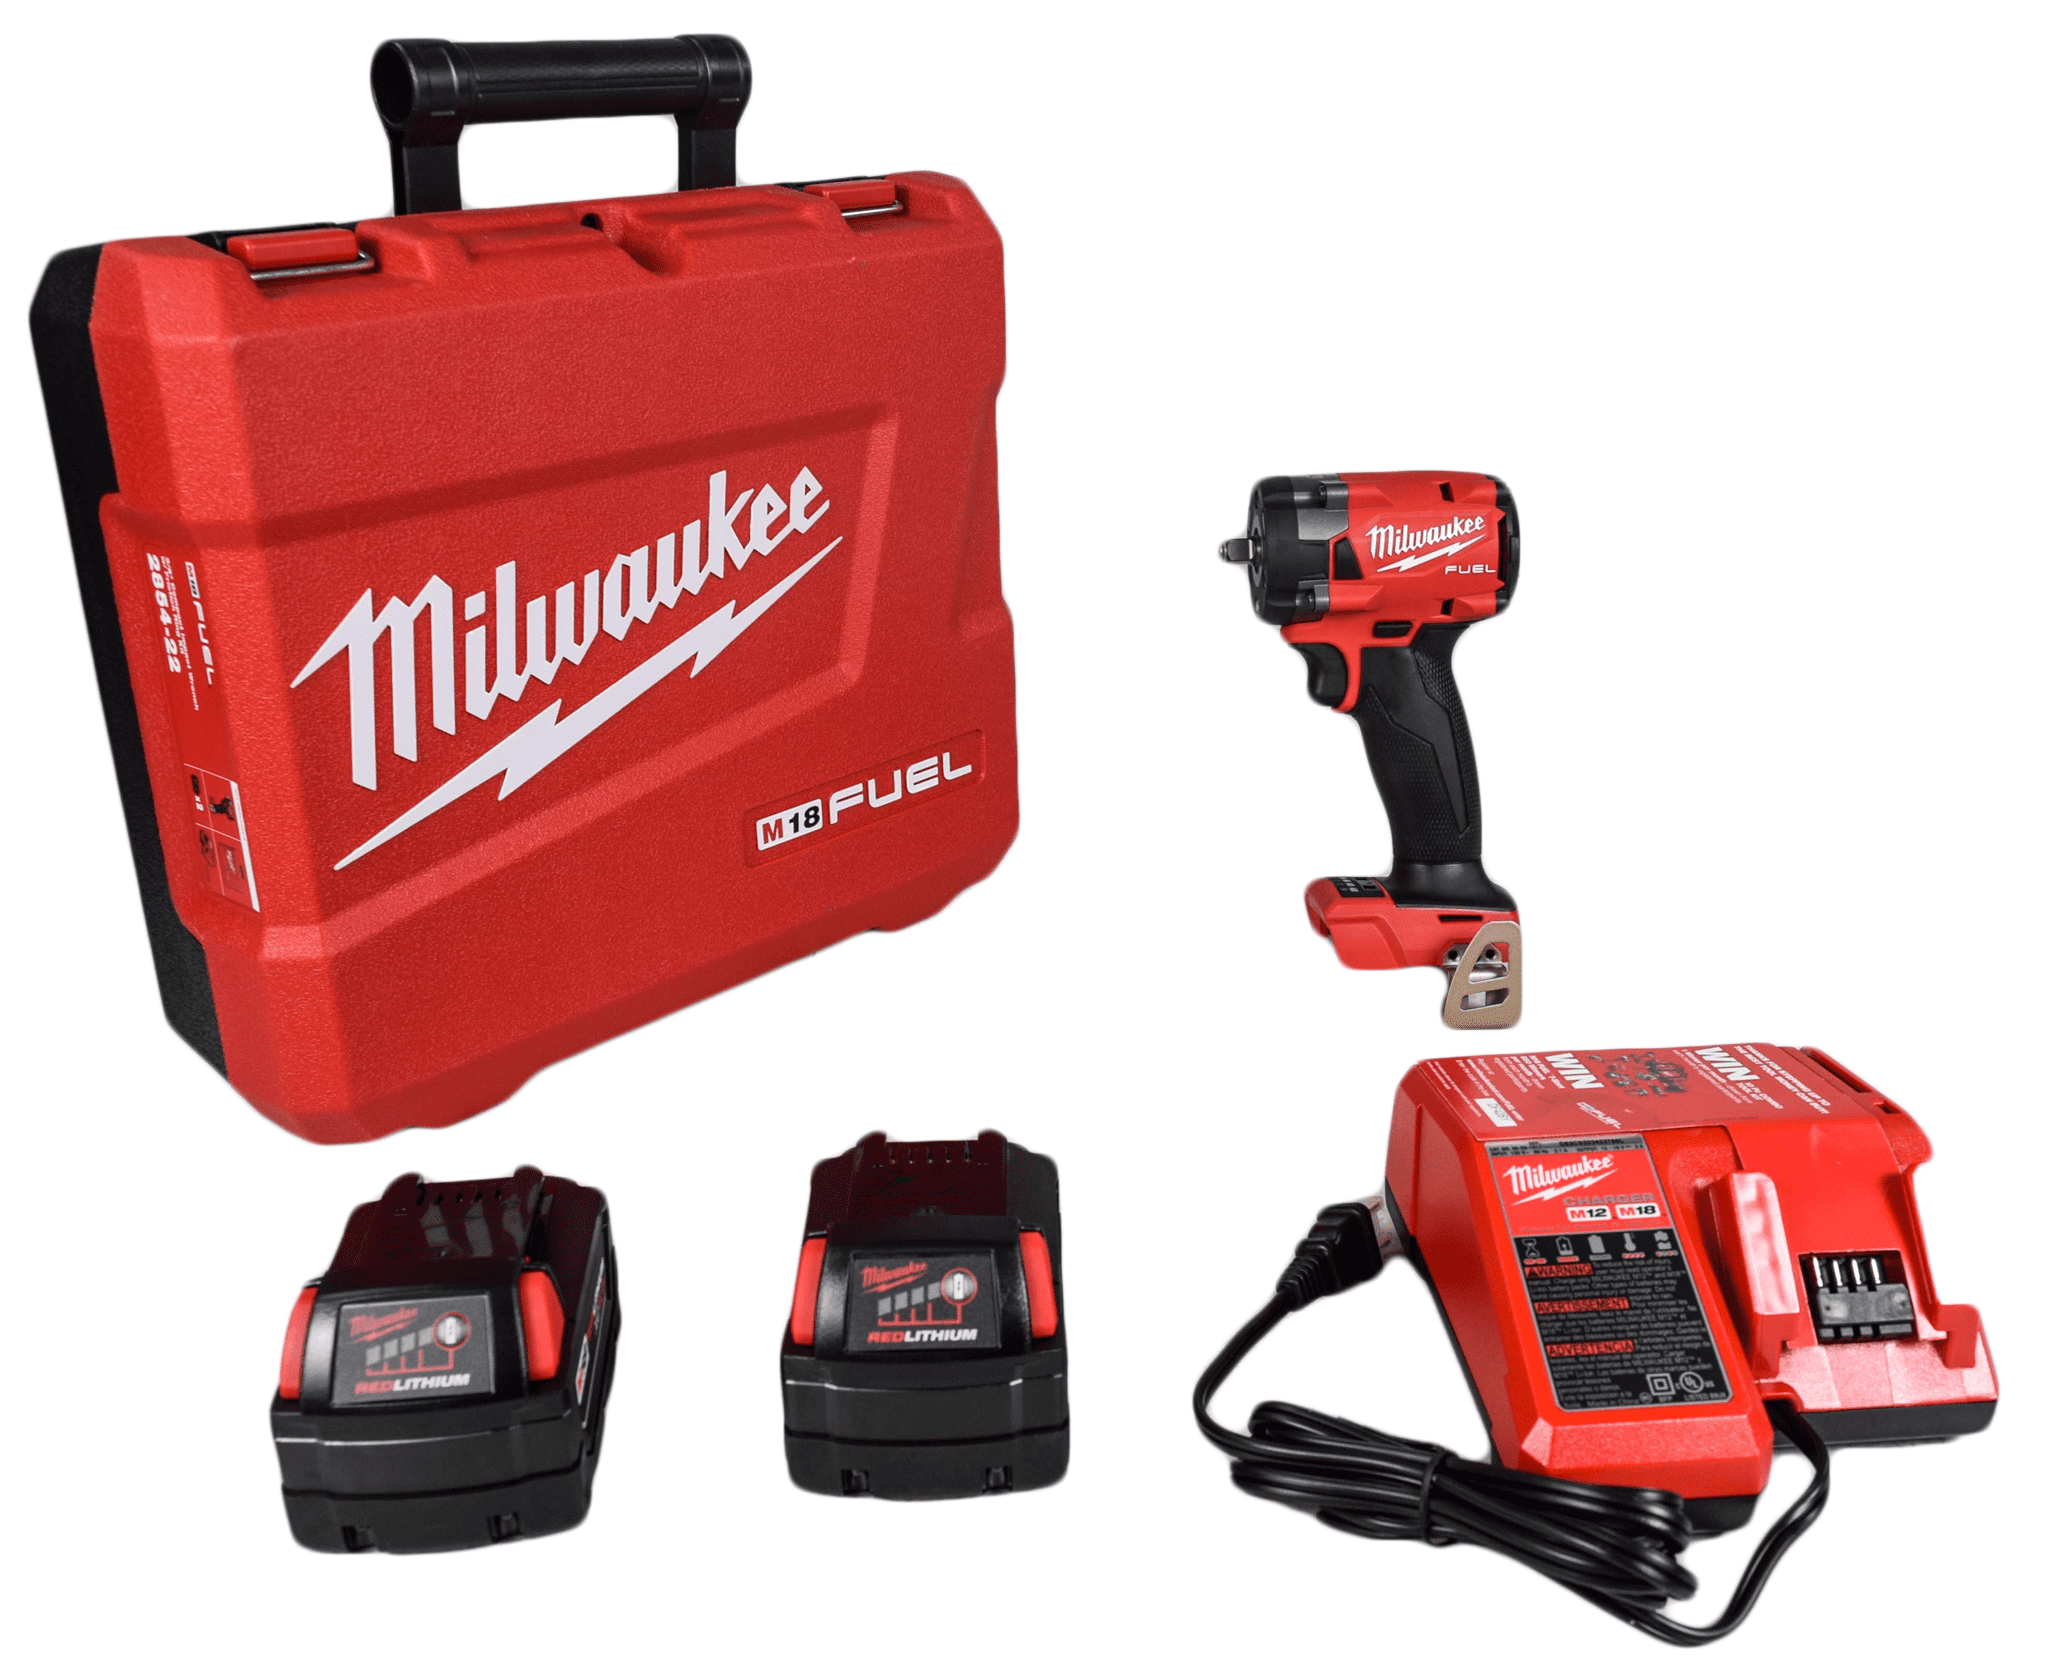 M18/M12 12/18-Volt Lithium-Ion Cordless 3/8 in Impact Wrenc Ratchet and 1/2 in 